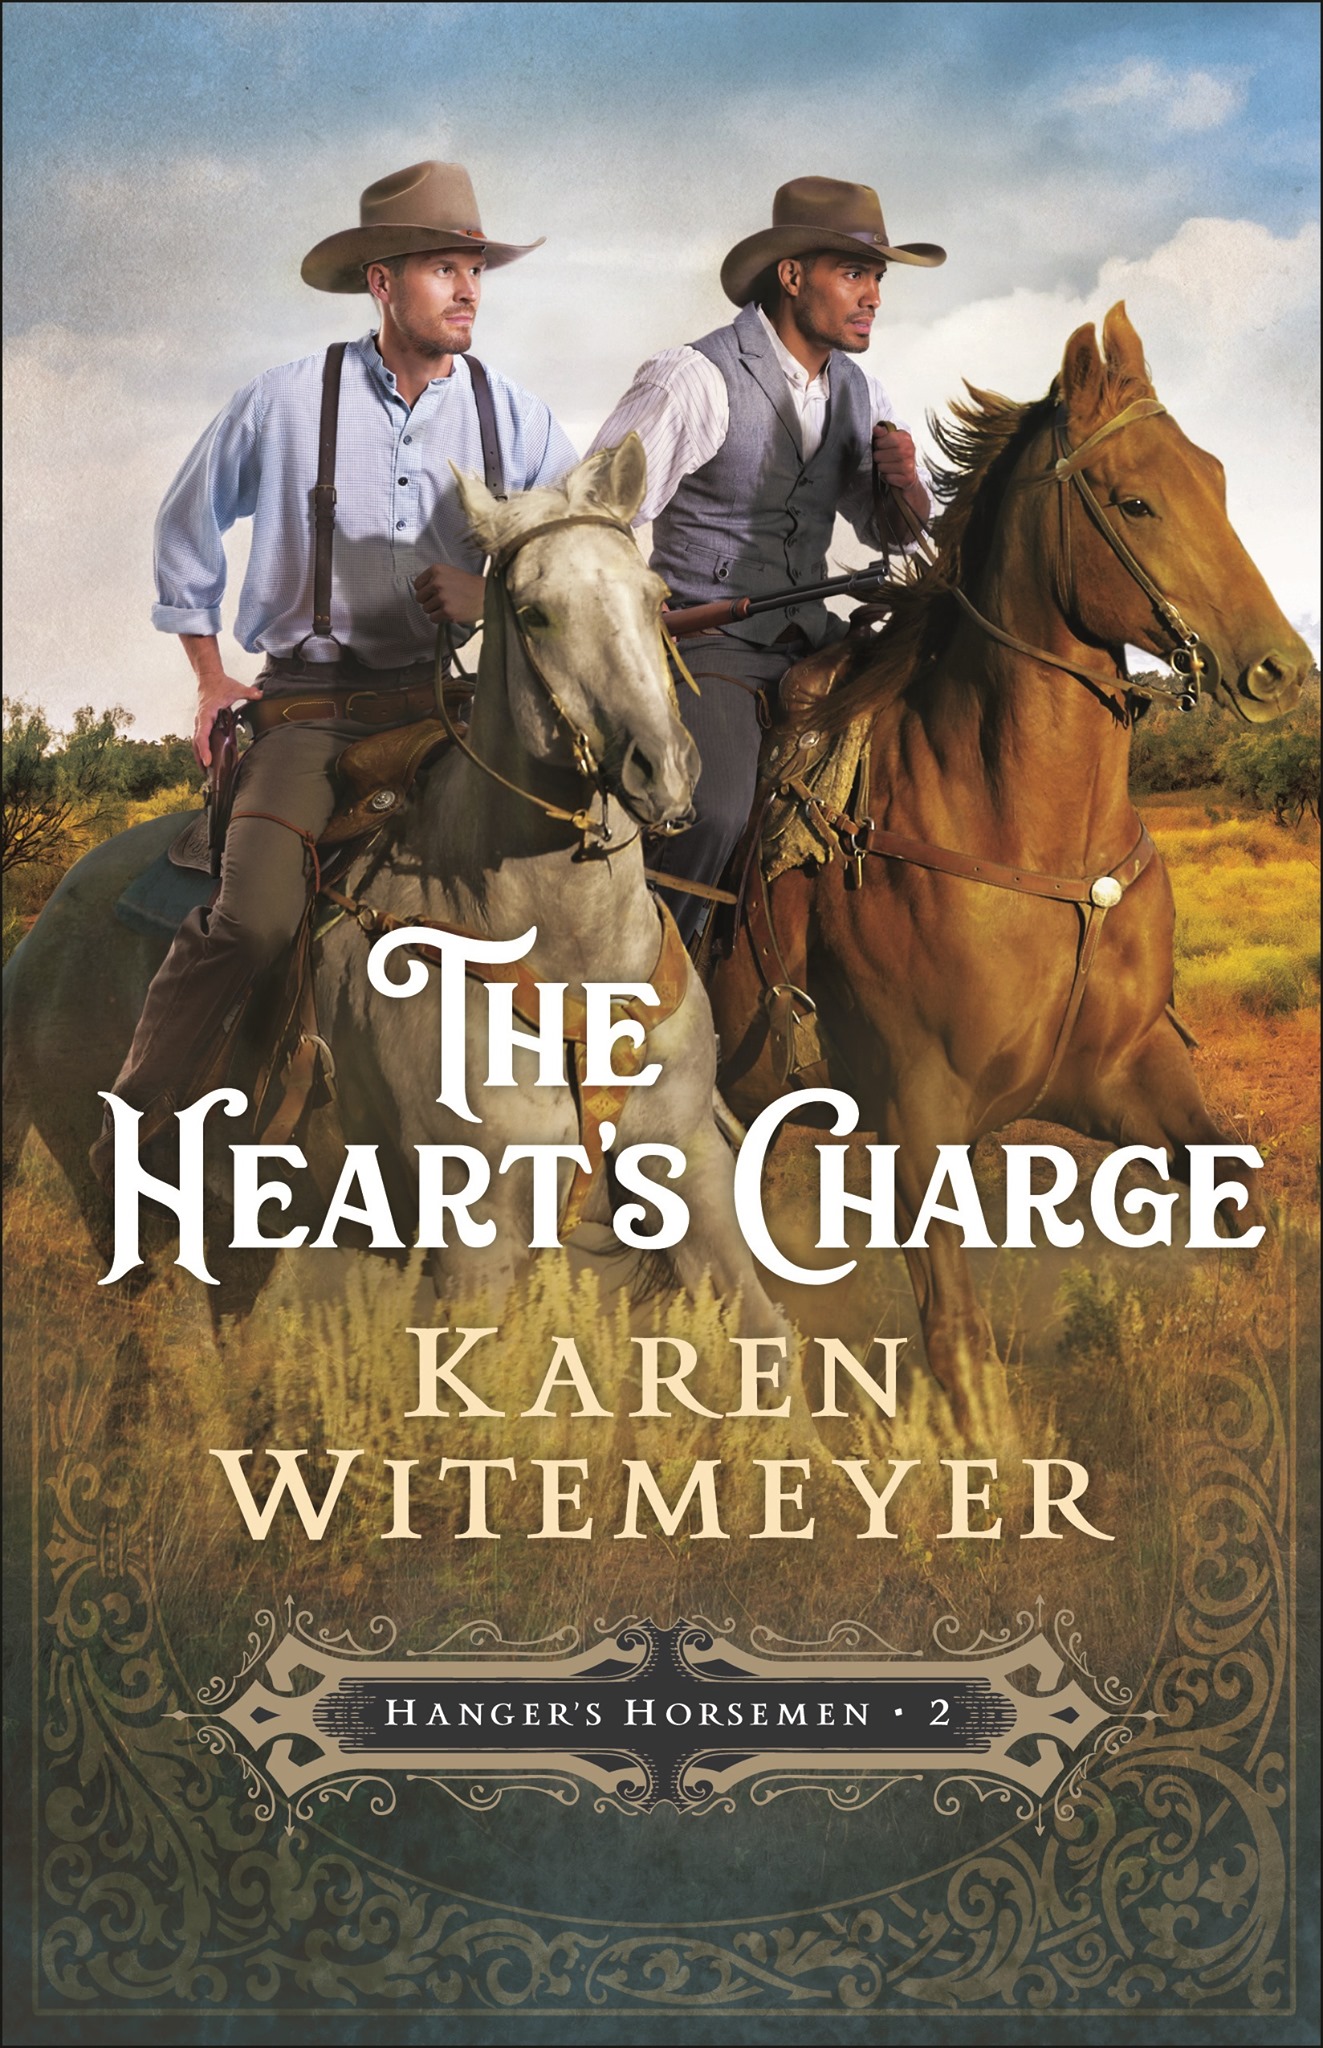 The Heart's Charge By Karen Witemeyer